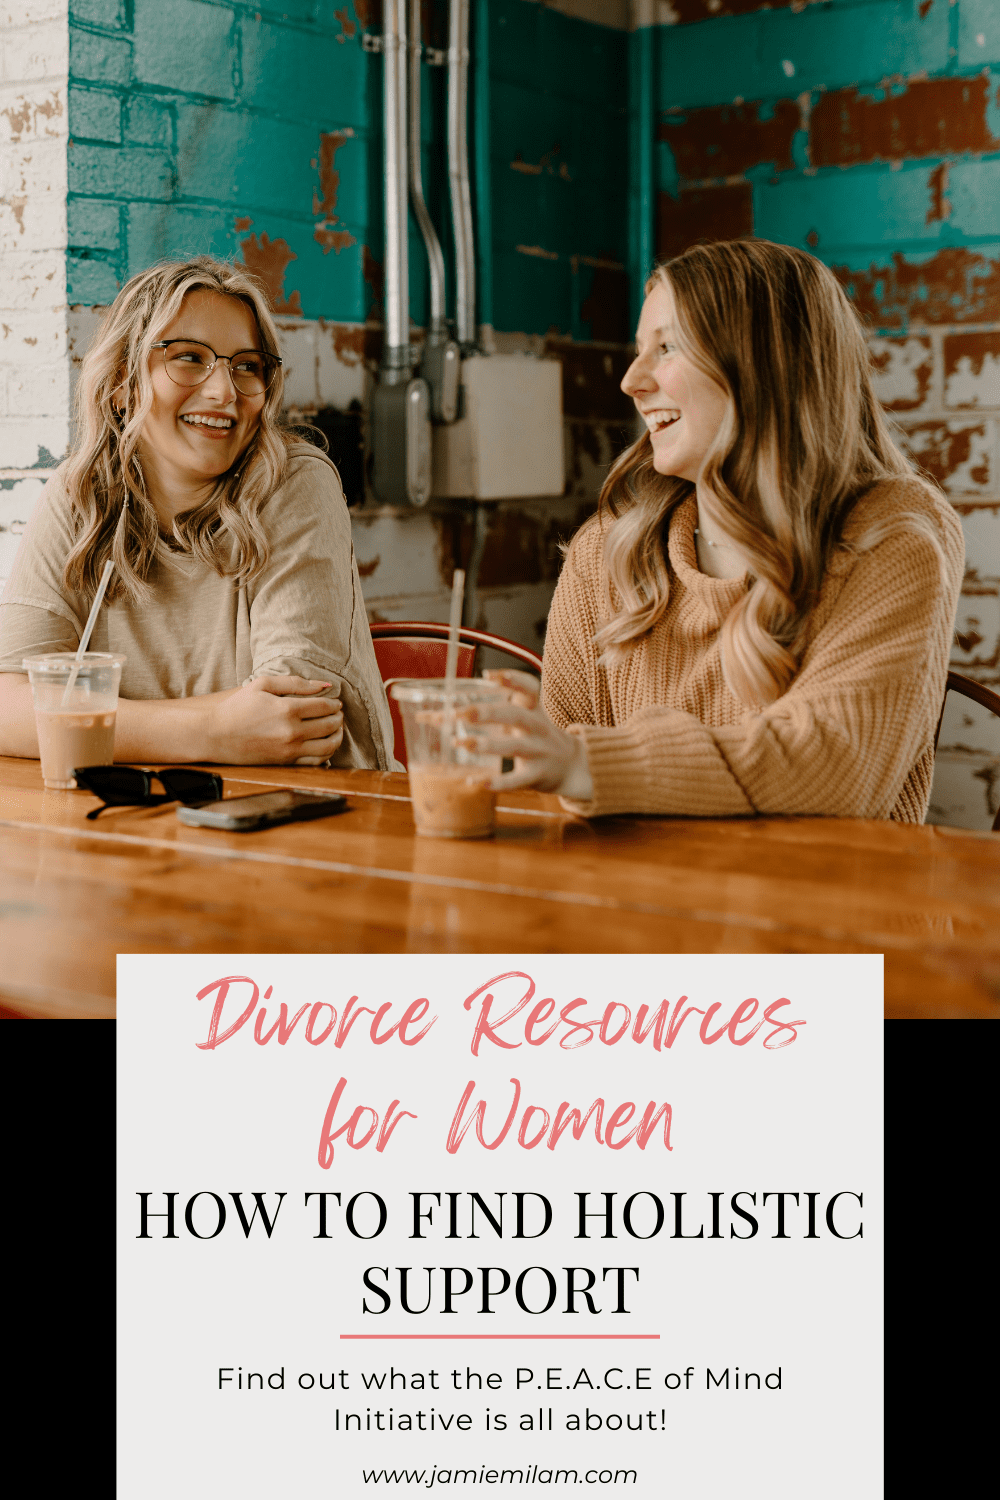 Image of two women talking and the text "Divorce Resources for Women: How to Find Holistic Support"